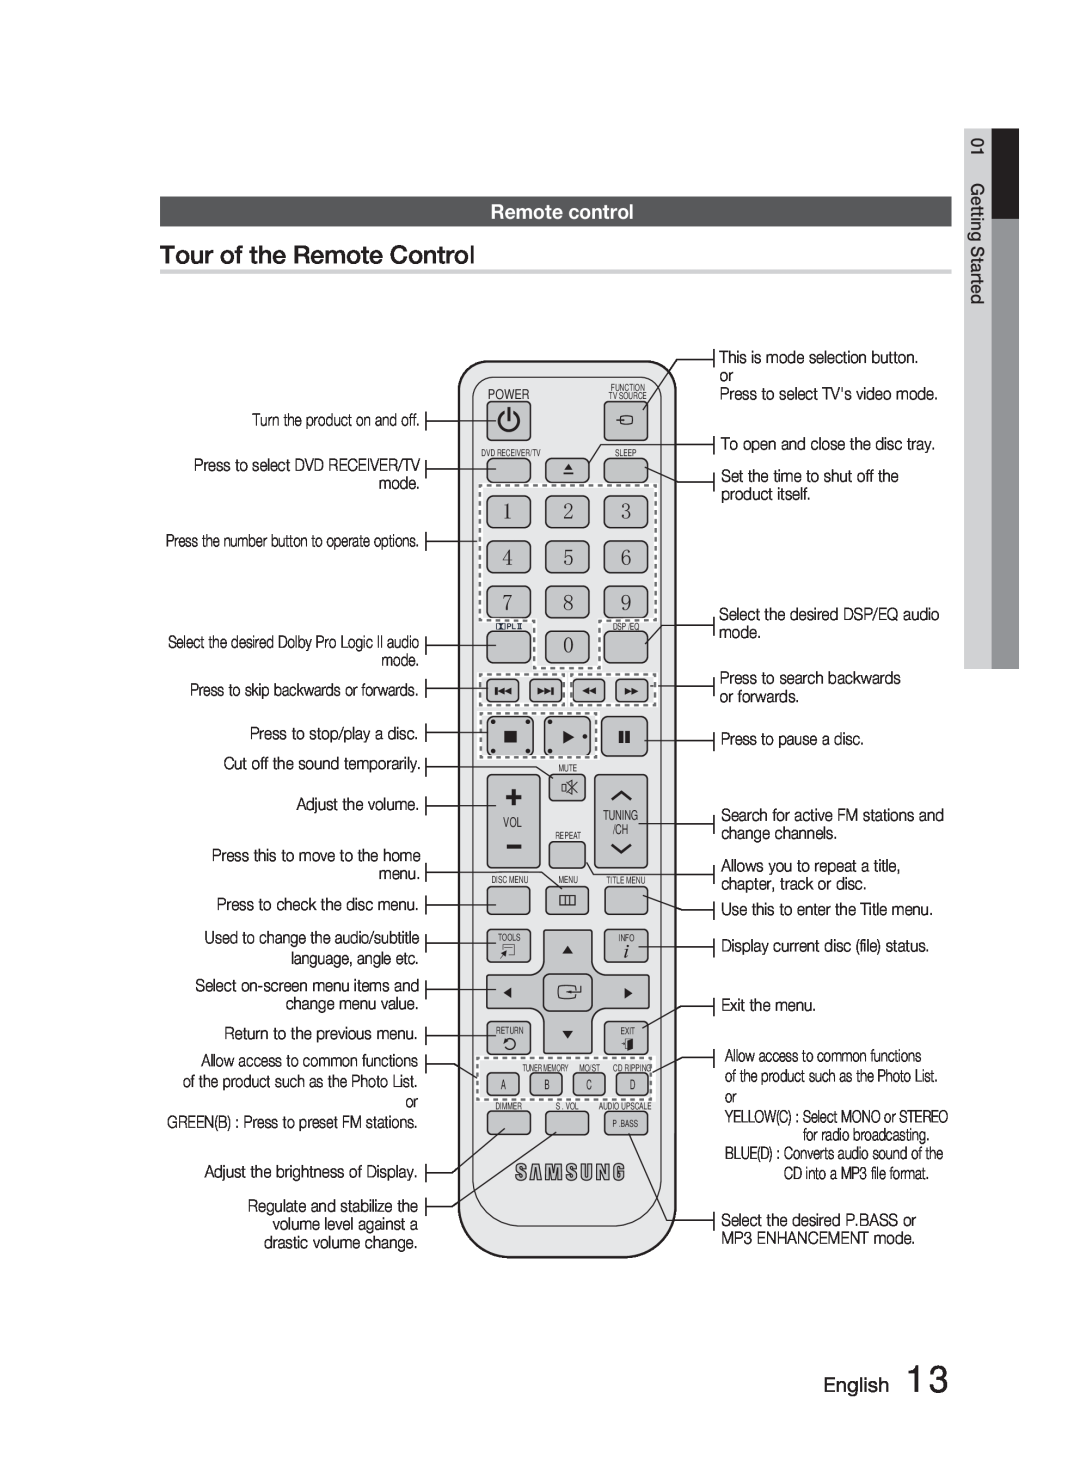 Samsung HT-C463-XAC Tour of the Remote Control, Remote control, English, Getting Started, Turn the product on and off 